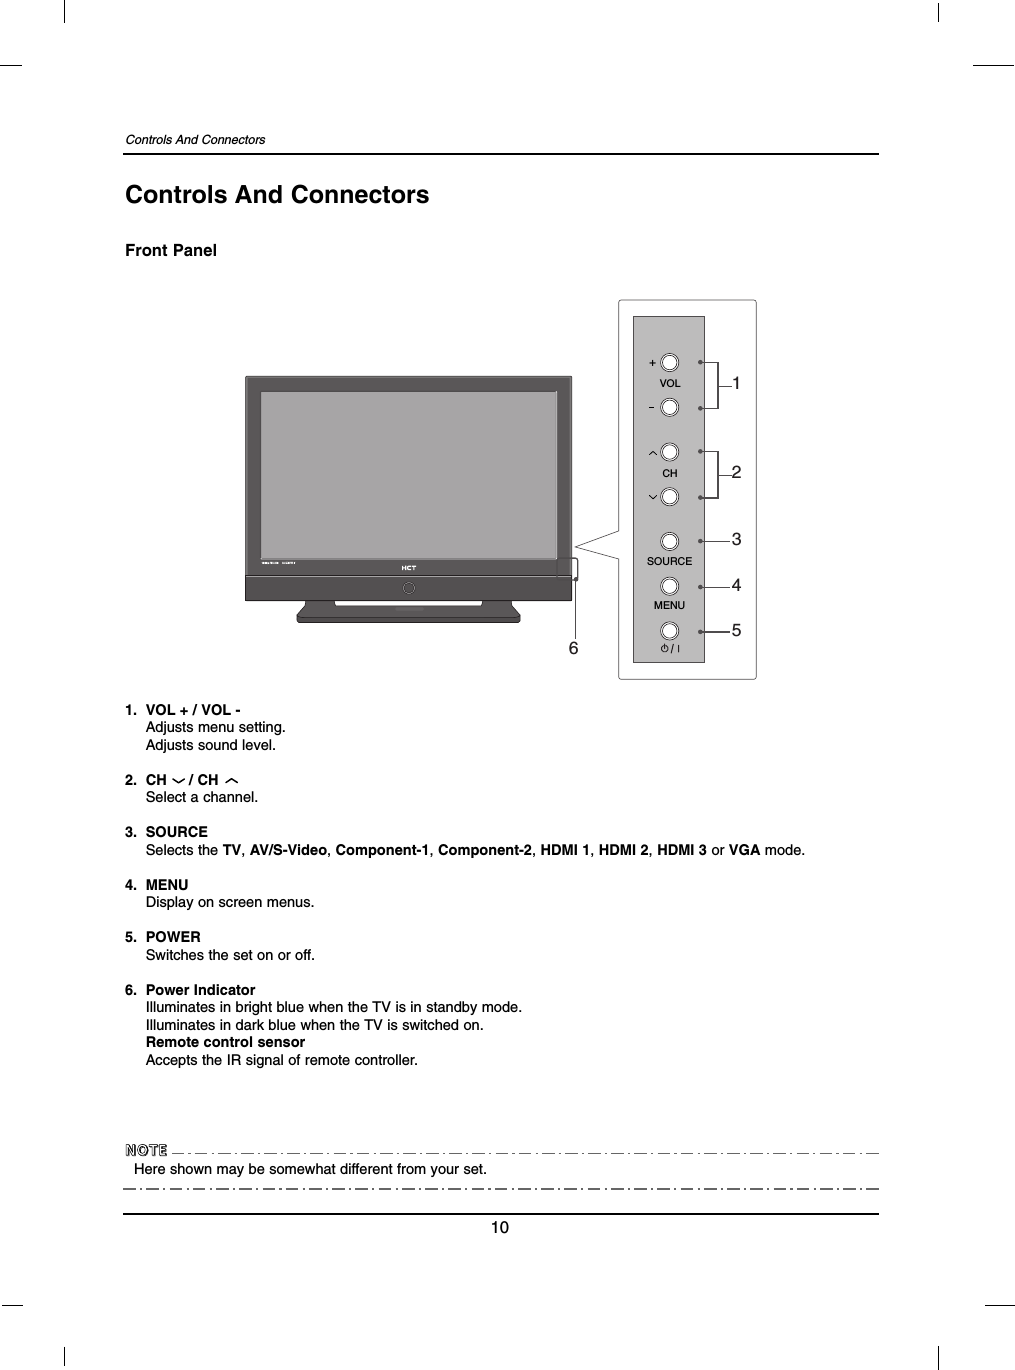 Controls And Connectors10Controls And ConnectorsFront Panel6SOURCEMENU+VOLCH123451. VOL + / VOL -Adjusts menu setting.Adjusts sound level.2. CH     / CH Select a channel.3. SOURCESelects the TV, AV/S-Video, Component-1,Component-2, HDMI 1, HDMI 2, HDMI 3 or VGA mode.4. MENUDisplay on screen menus.5. POWERSwitches the set on or off.6. Power IndicatorIlluminates in bright blue when the TV is in standby mode.Illuminates in dark blue when the TV is switched on.Remote control sensorAccepts the IR signal of remote controller.Here shown may be somewhat different from your set.NNNNOOOOTTTTEEEE